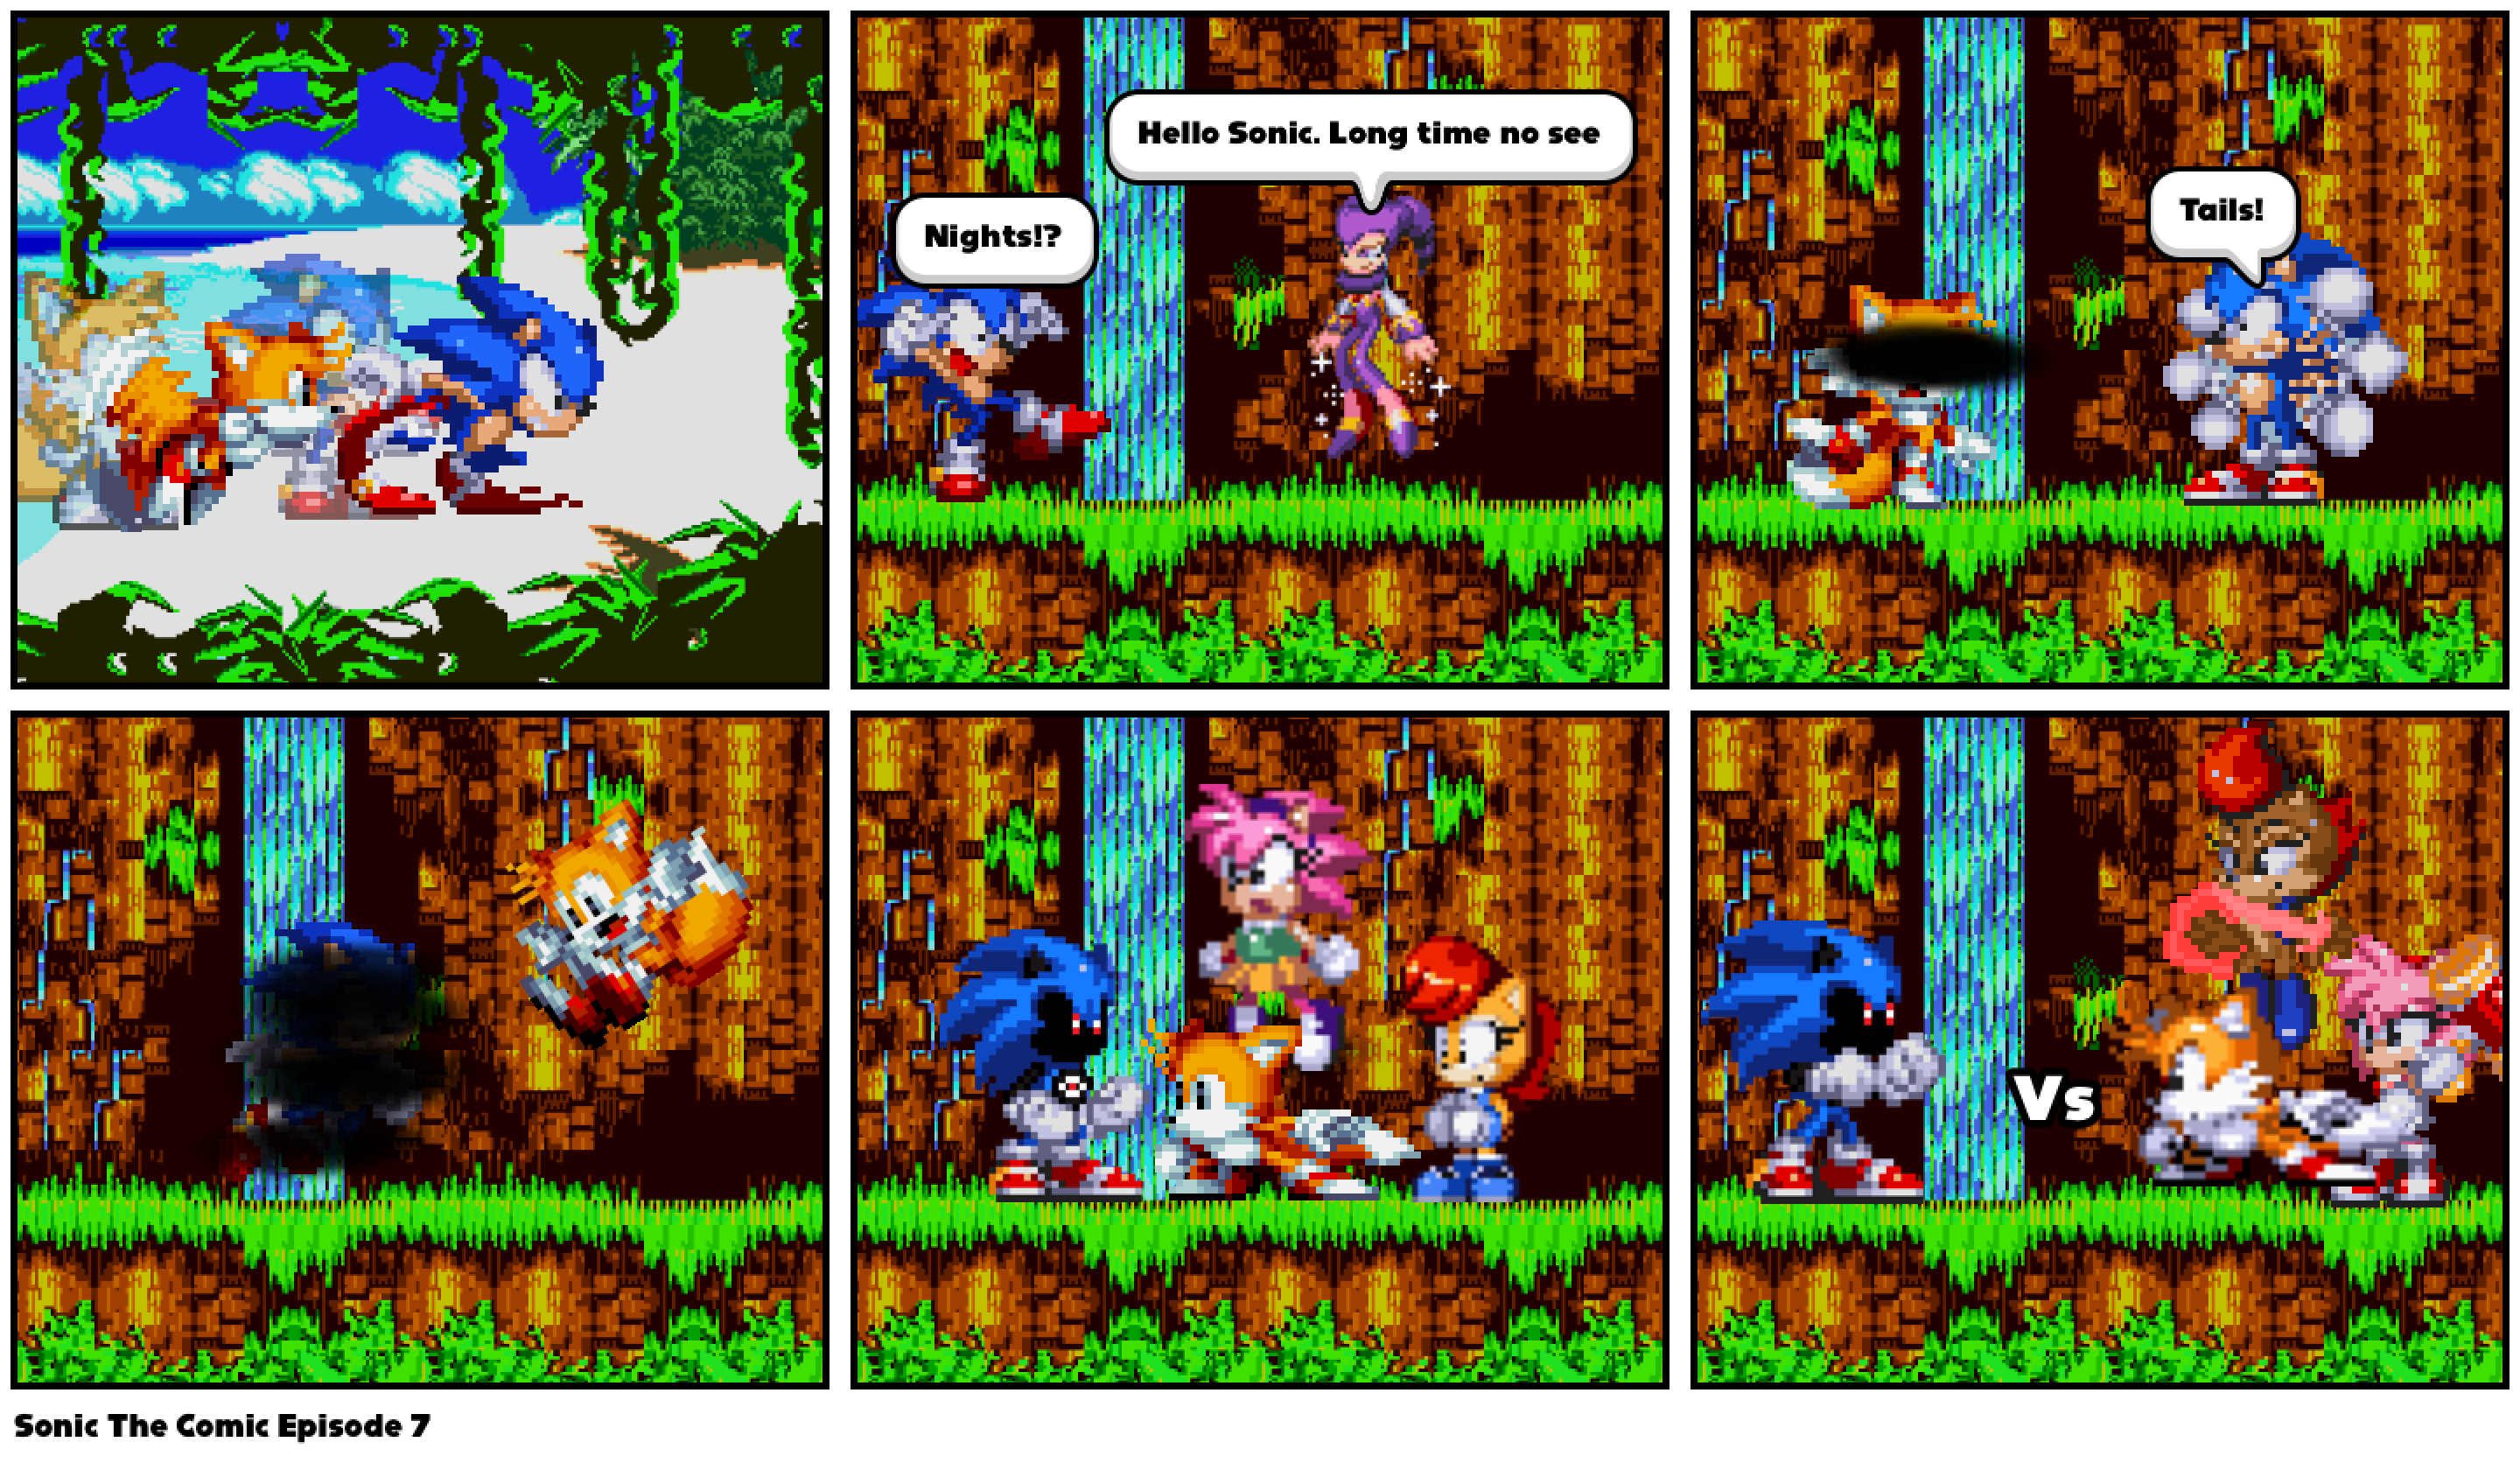 Sonic The Comic Episode 7